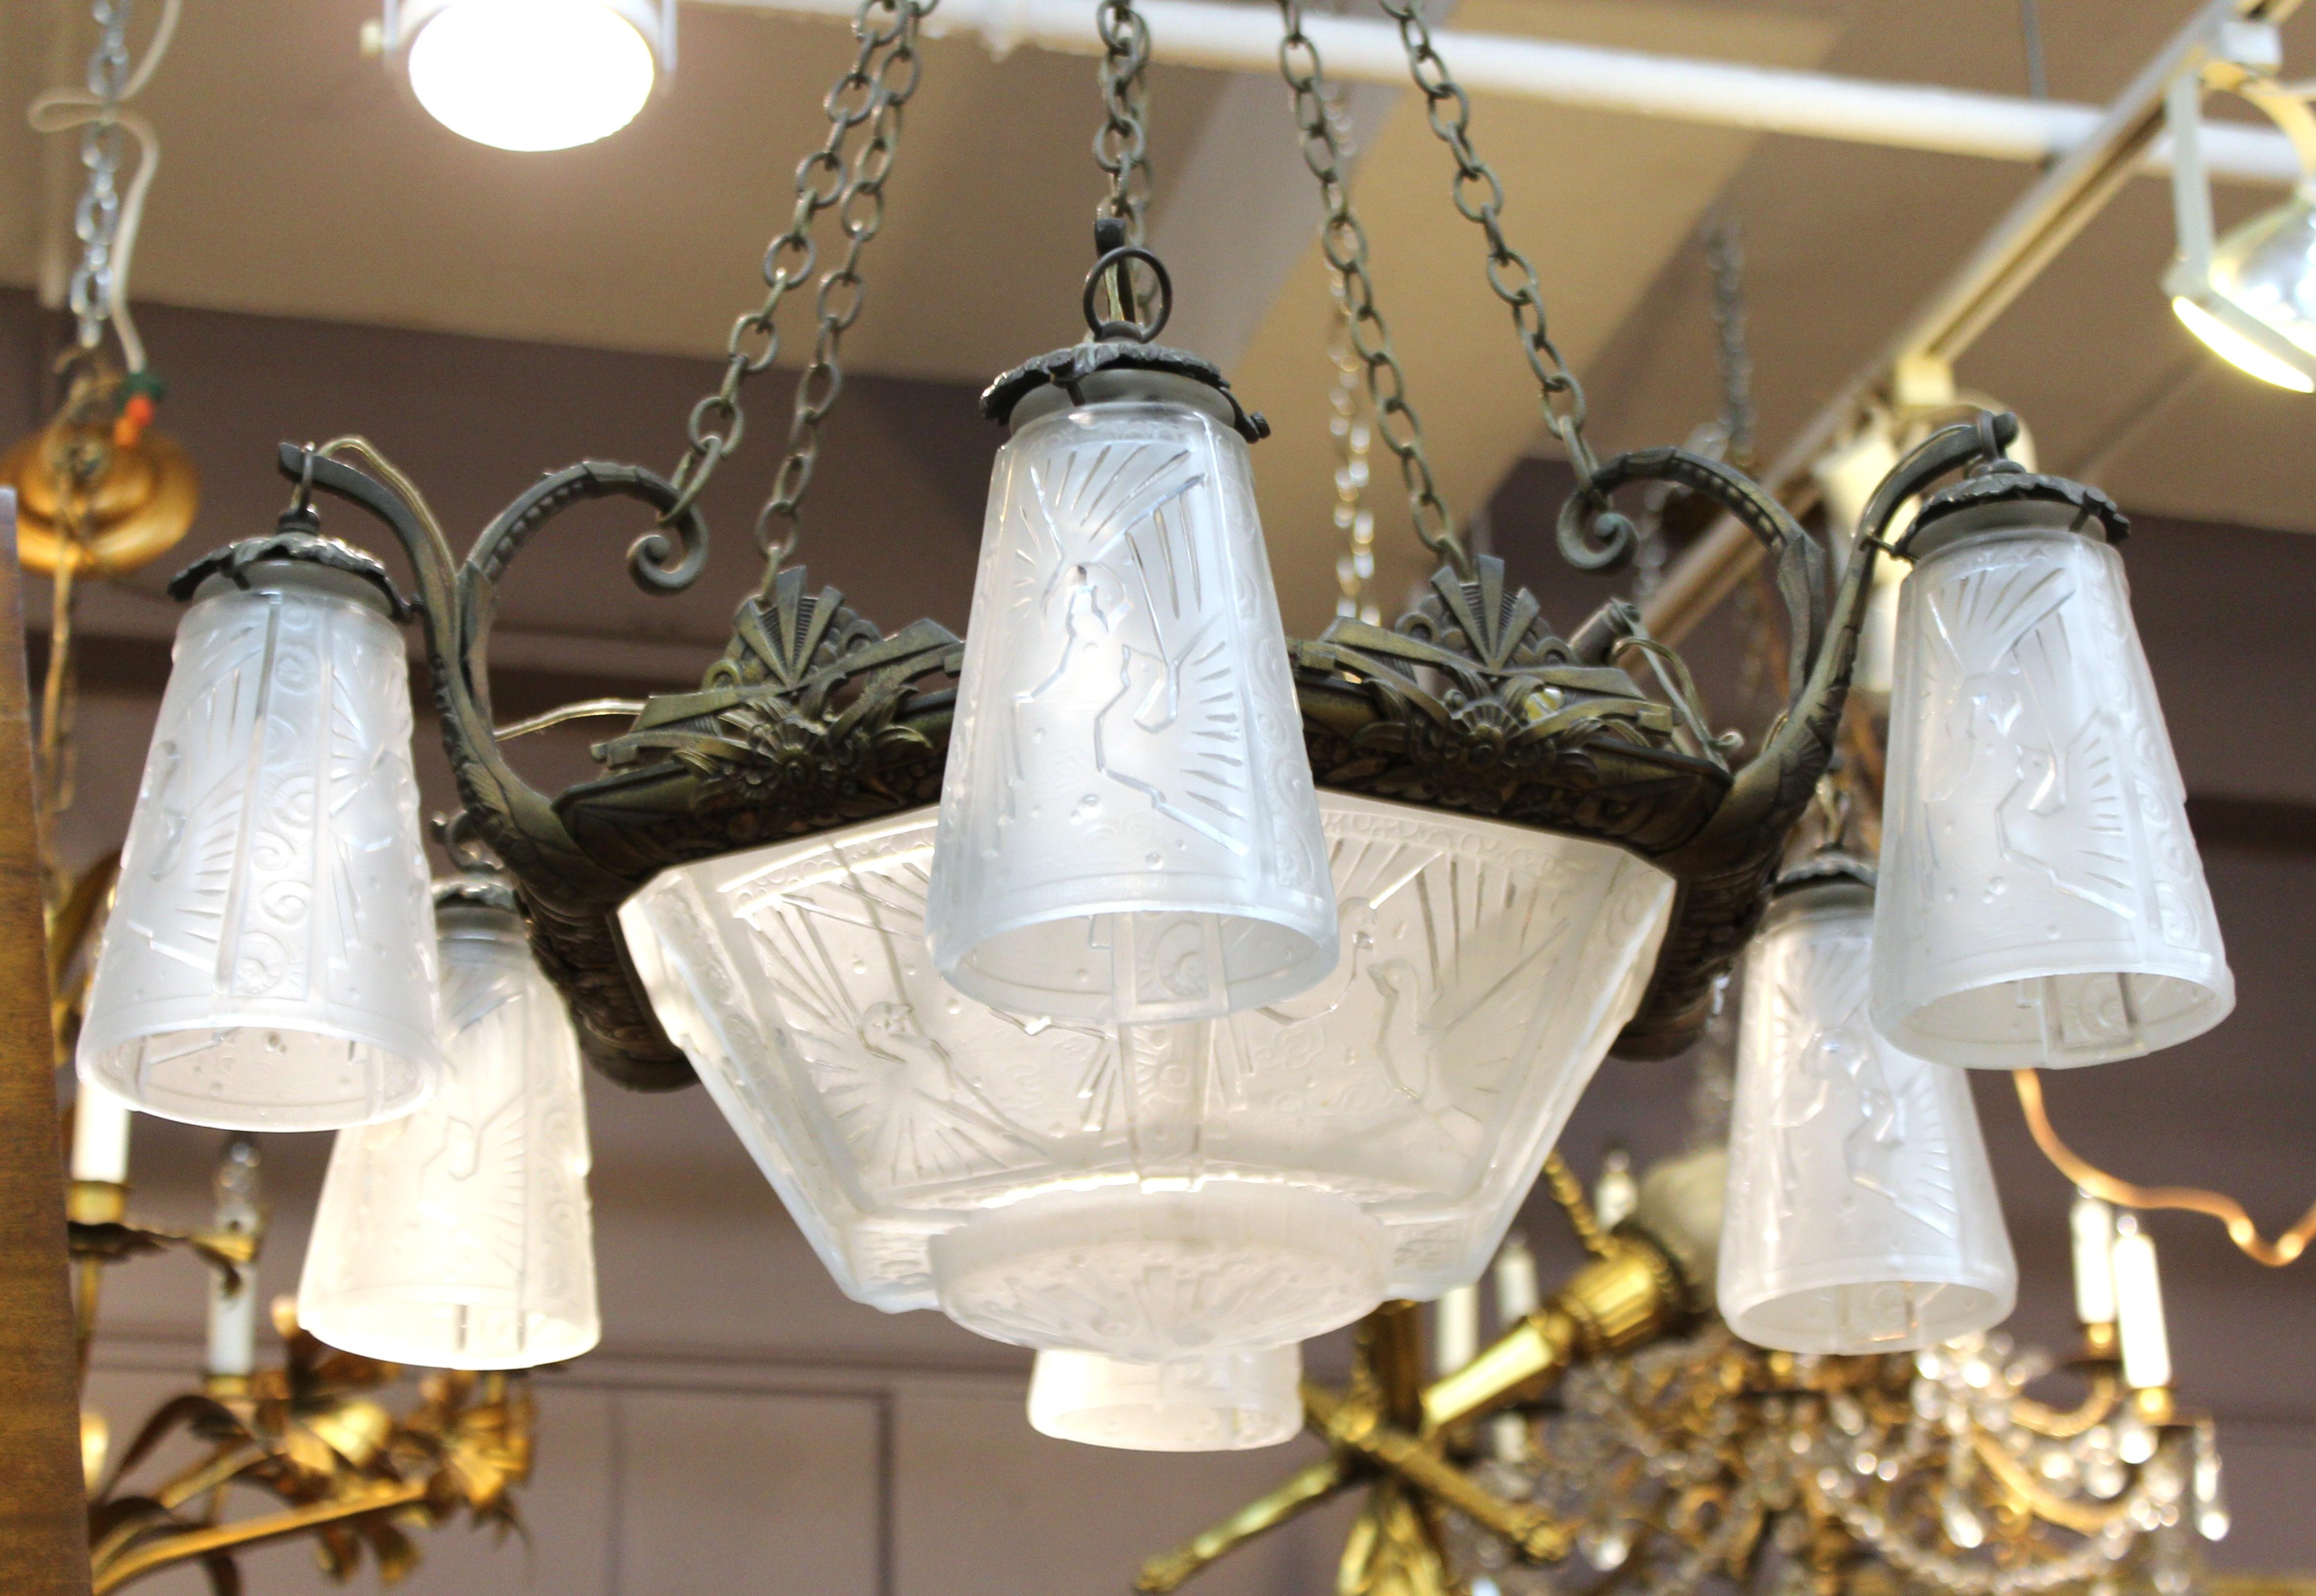 French Art Deco period ceiling chandelier designed by Muller Freres in Luneville, France. The very thick white molded glass shades are decorated with birds in flight and swirl patterns. There are a couple of minor chips to the edges of the glass